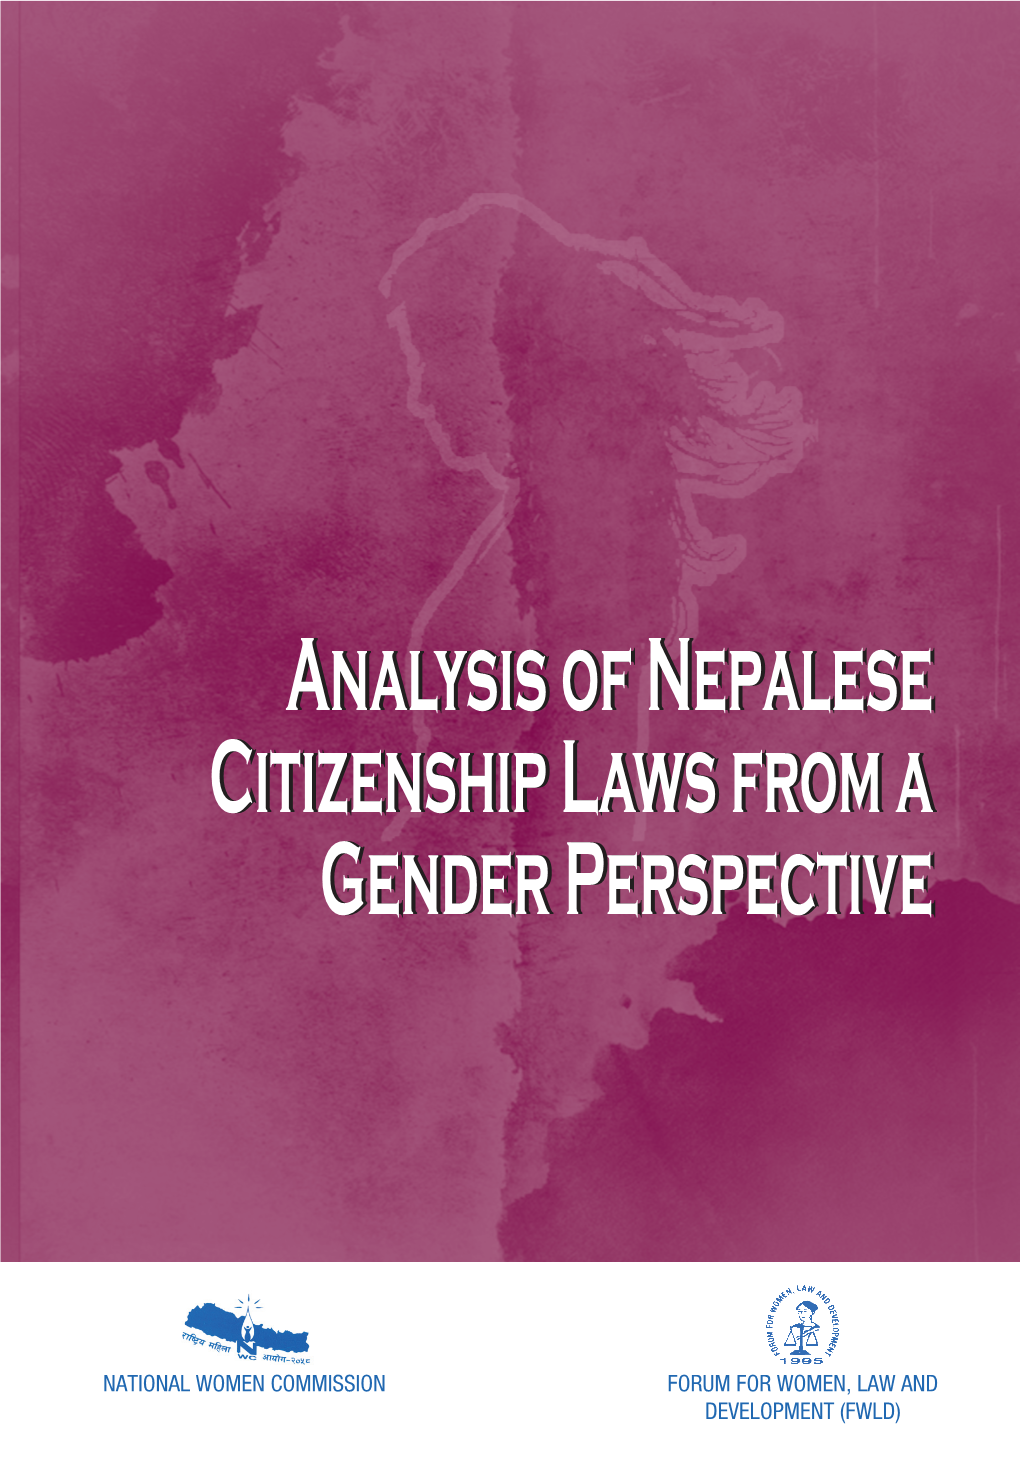 Analysis of Nepalese Citizenship Laws from a Gender Perspective